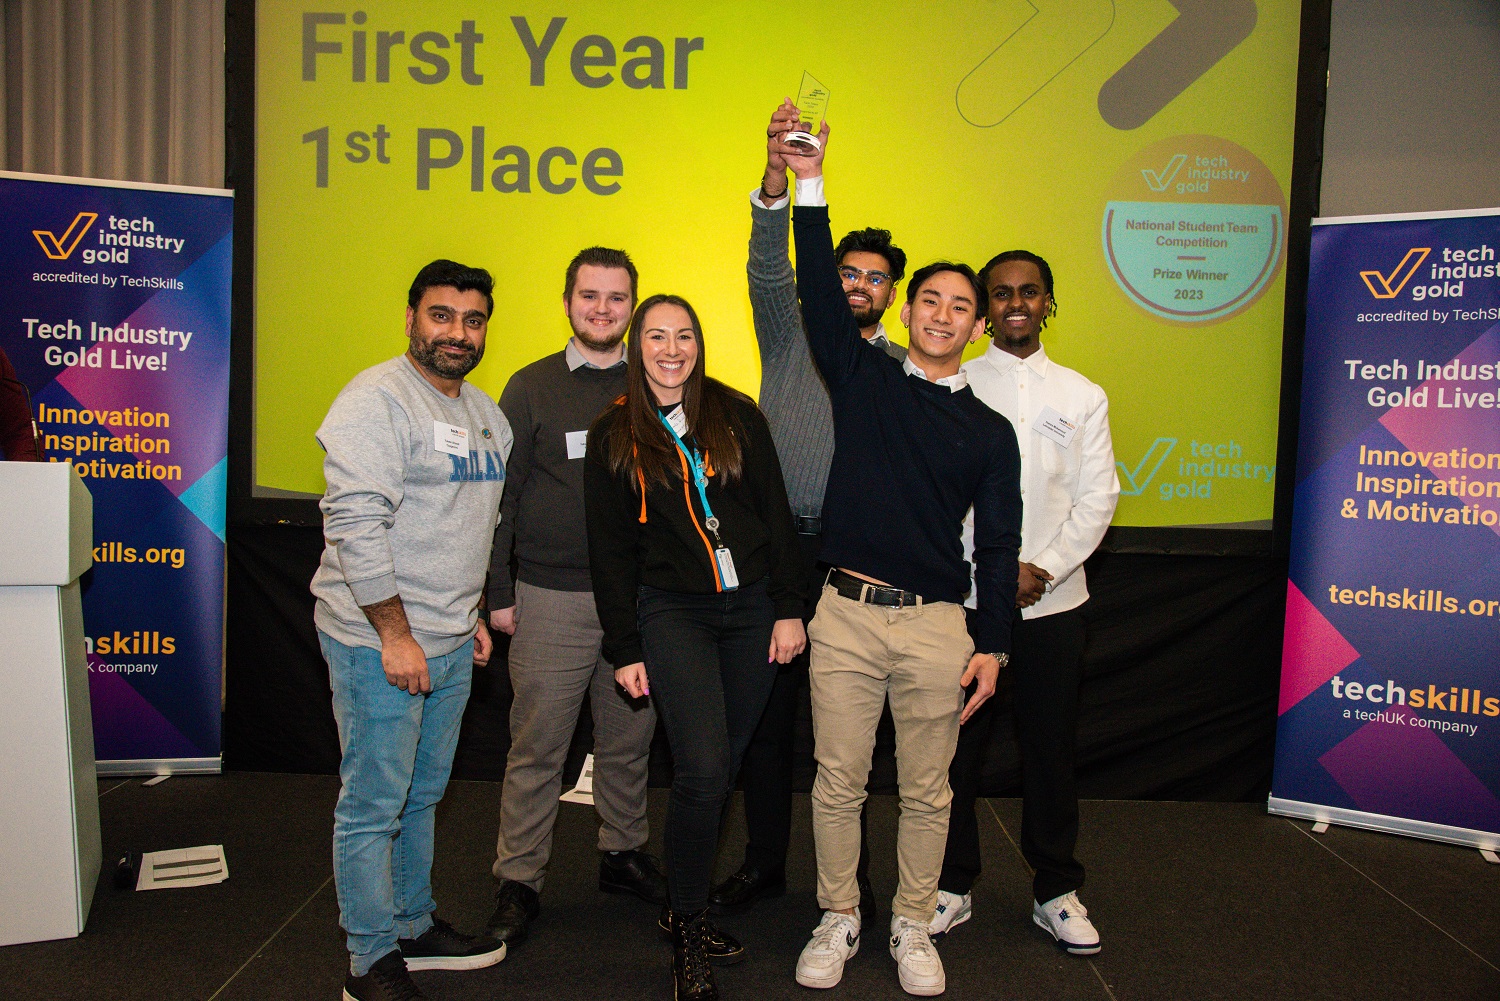 First year winning team from Lancaster University pictured at the event